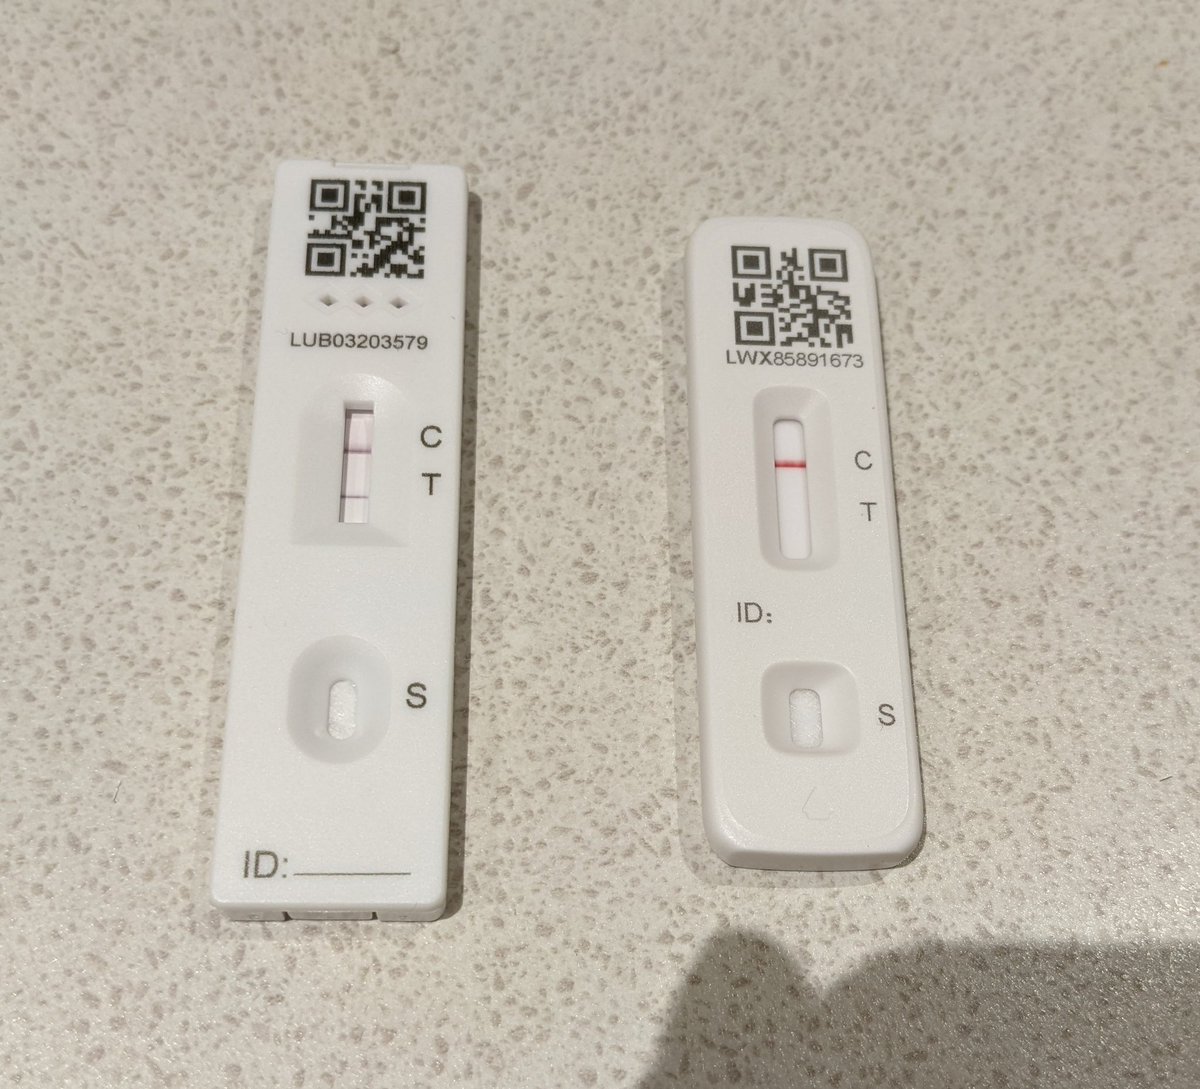 So, at 4am I woke up feeling rough. Came downstairs took paracetamol and did the test on the left (a throat and nose one). At half 6 I did another (just nose) and it's negative!?!?! Anyone else experienced this issue? https://t.co/nkN1YhG3qQ